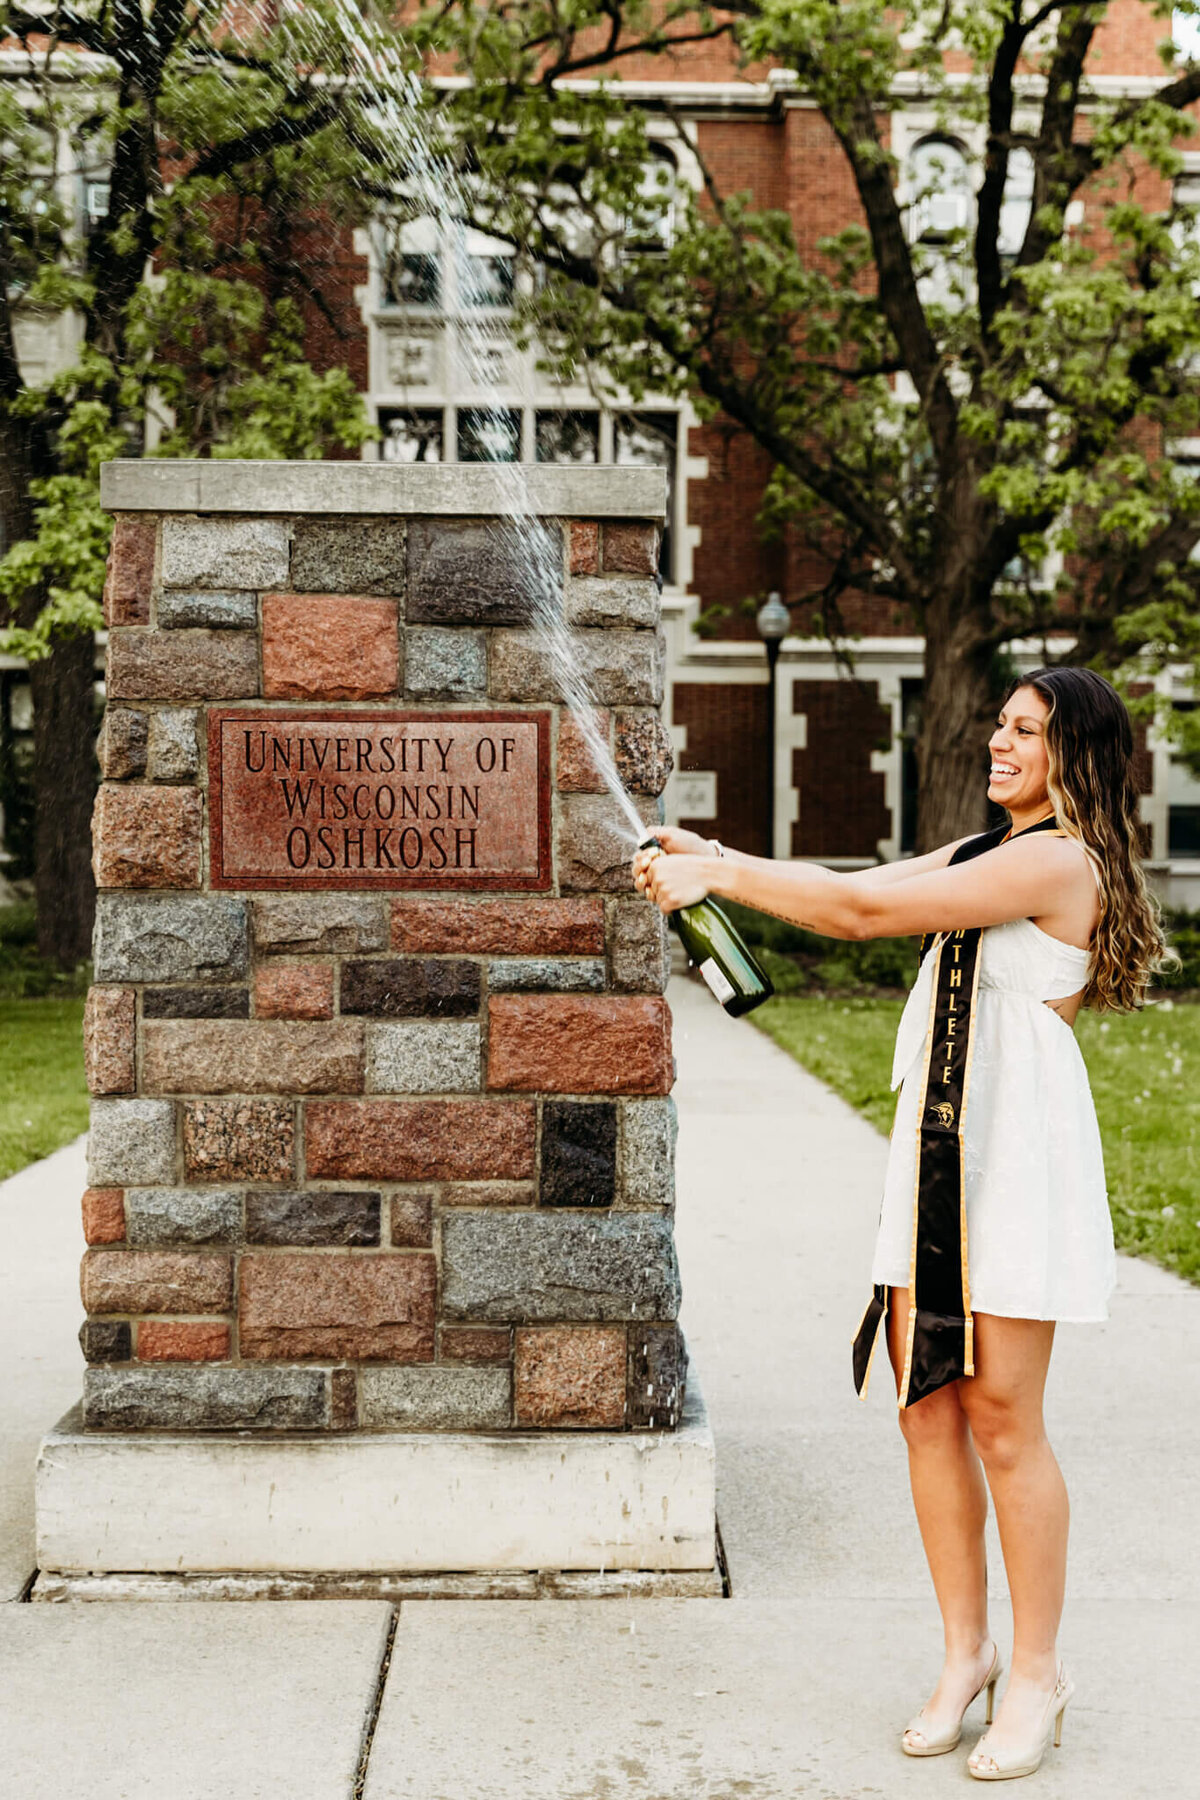 Pretty woman in a short white dress laughing as she sprays champagne in front of the UW Oshkosh sign on campus during her graduation photo session